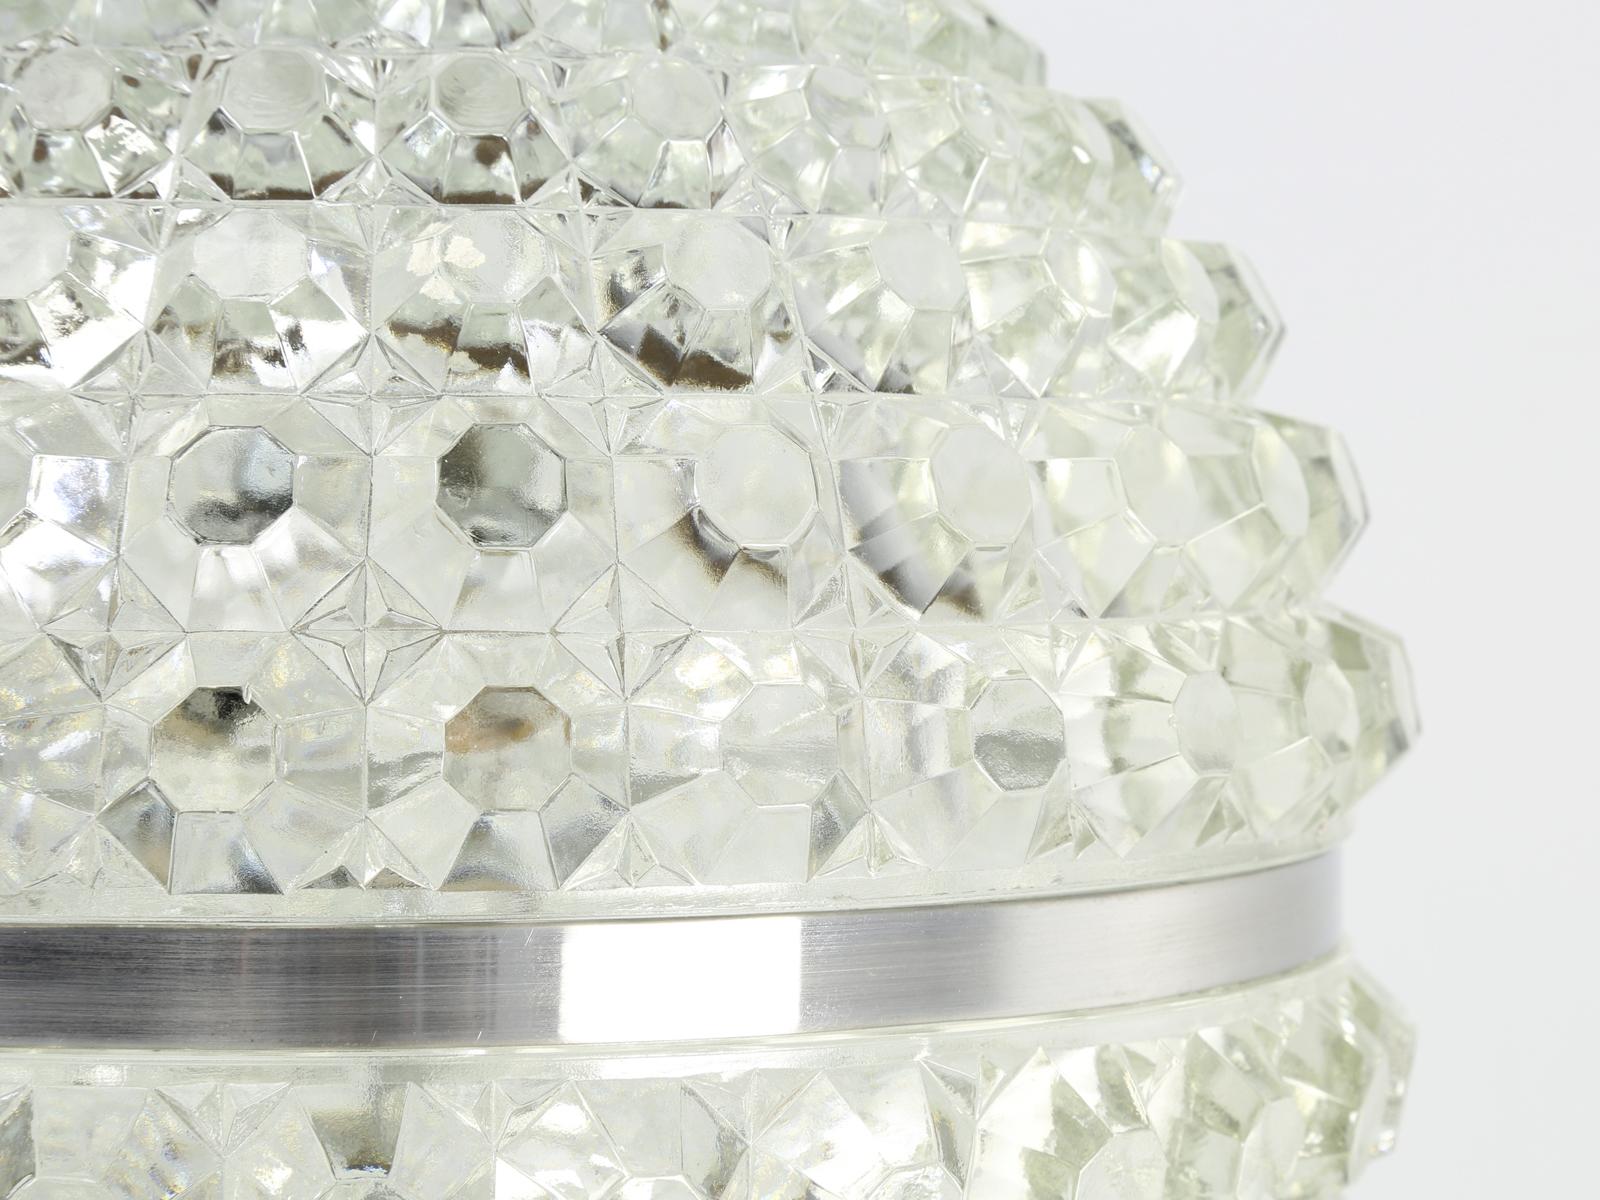 Late 20th Century Mid-Century Modern Crystal Orb Pendant Fixture from Argentina For Sale